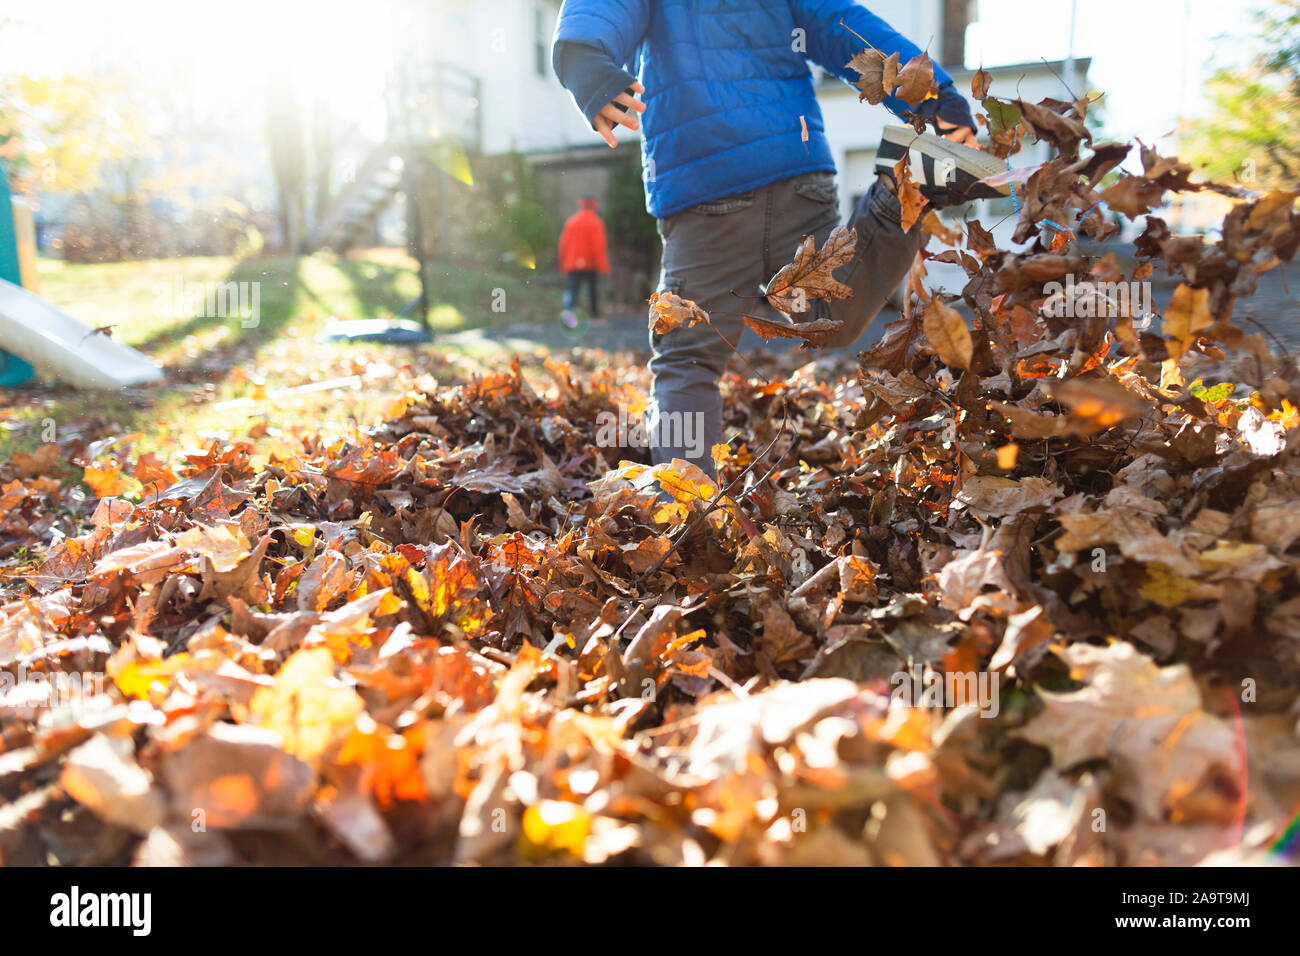 Child kicks leg up in a pile of leaves outside in yard during Autumn Stock Photo